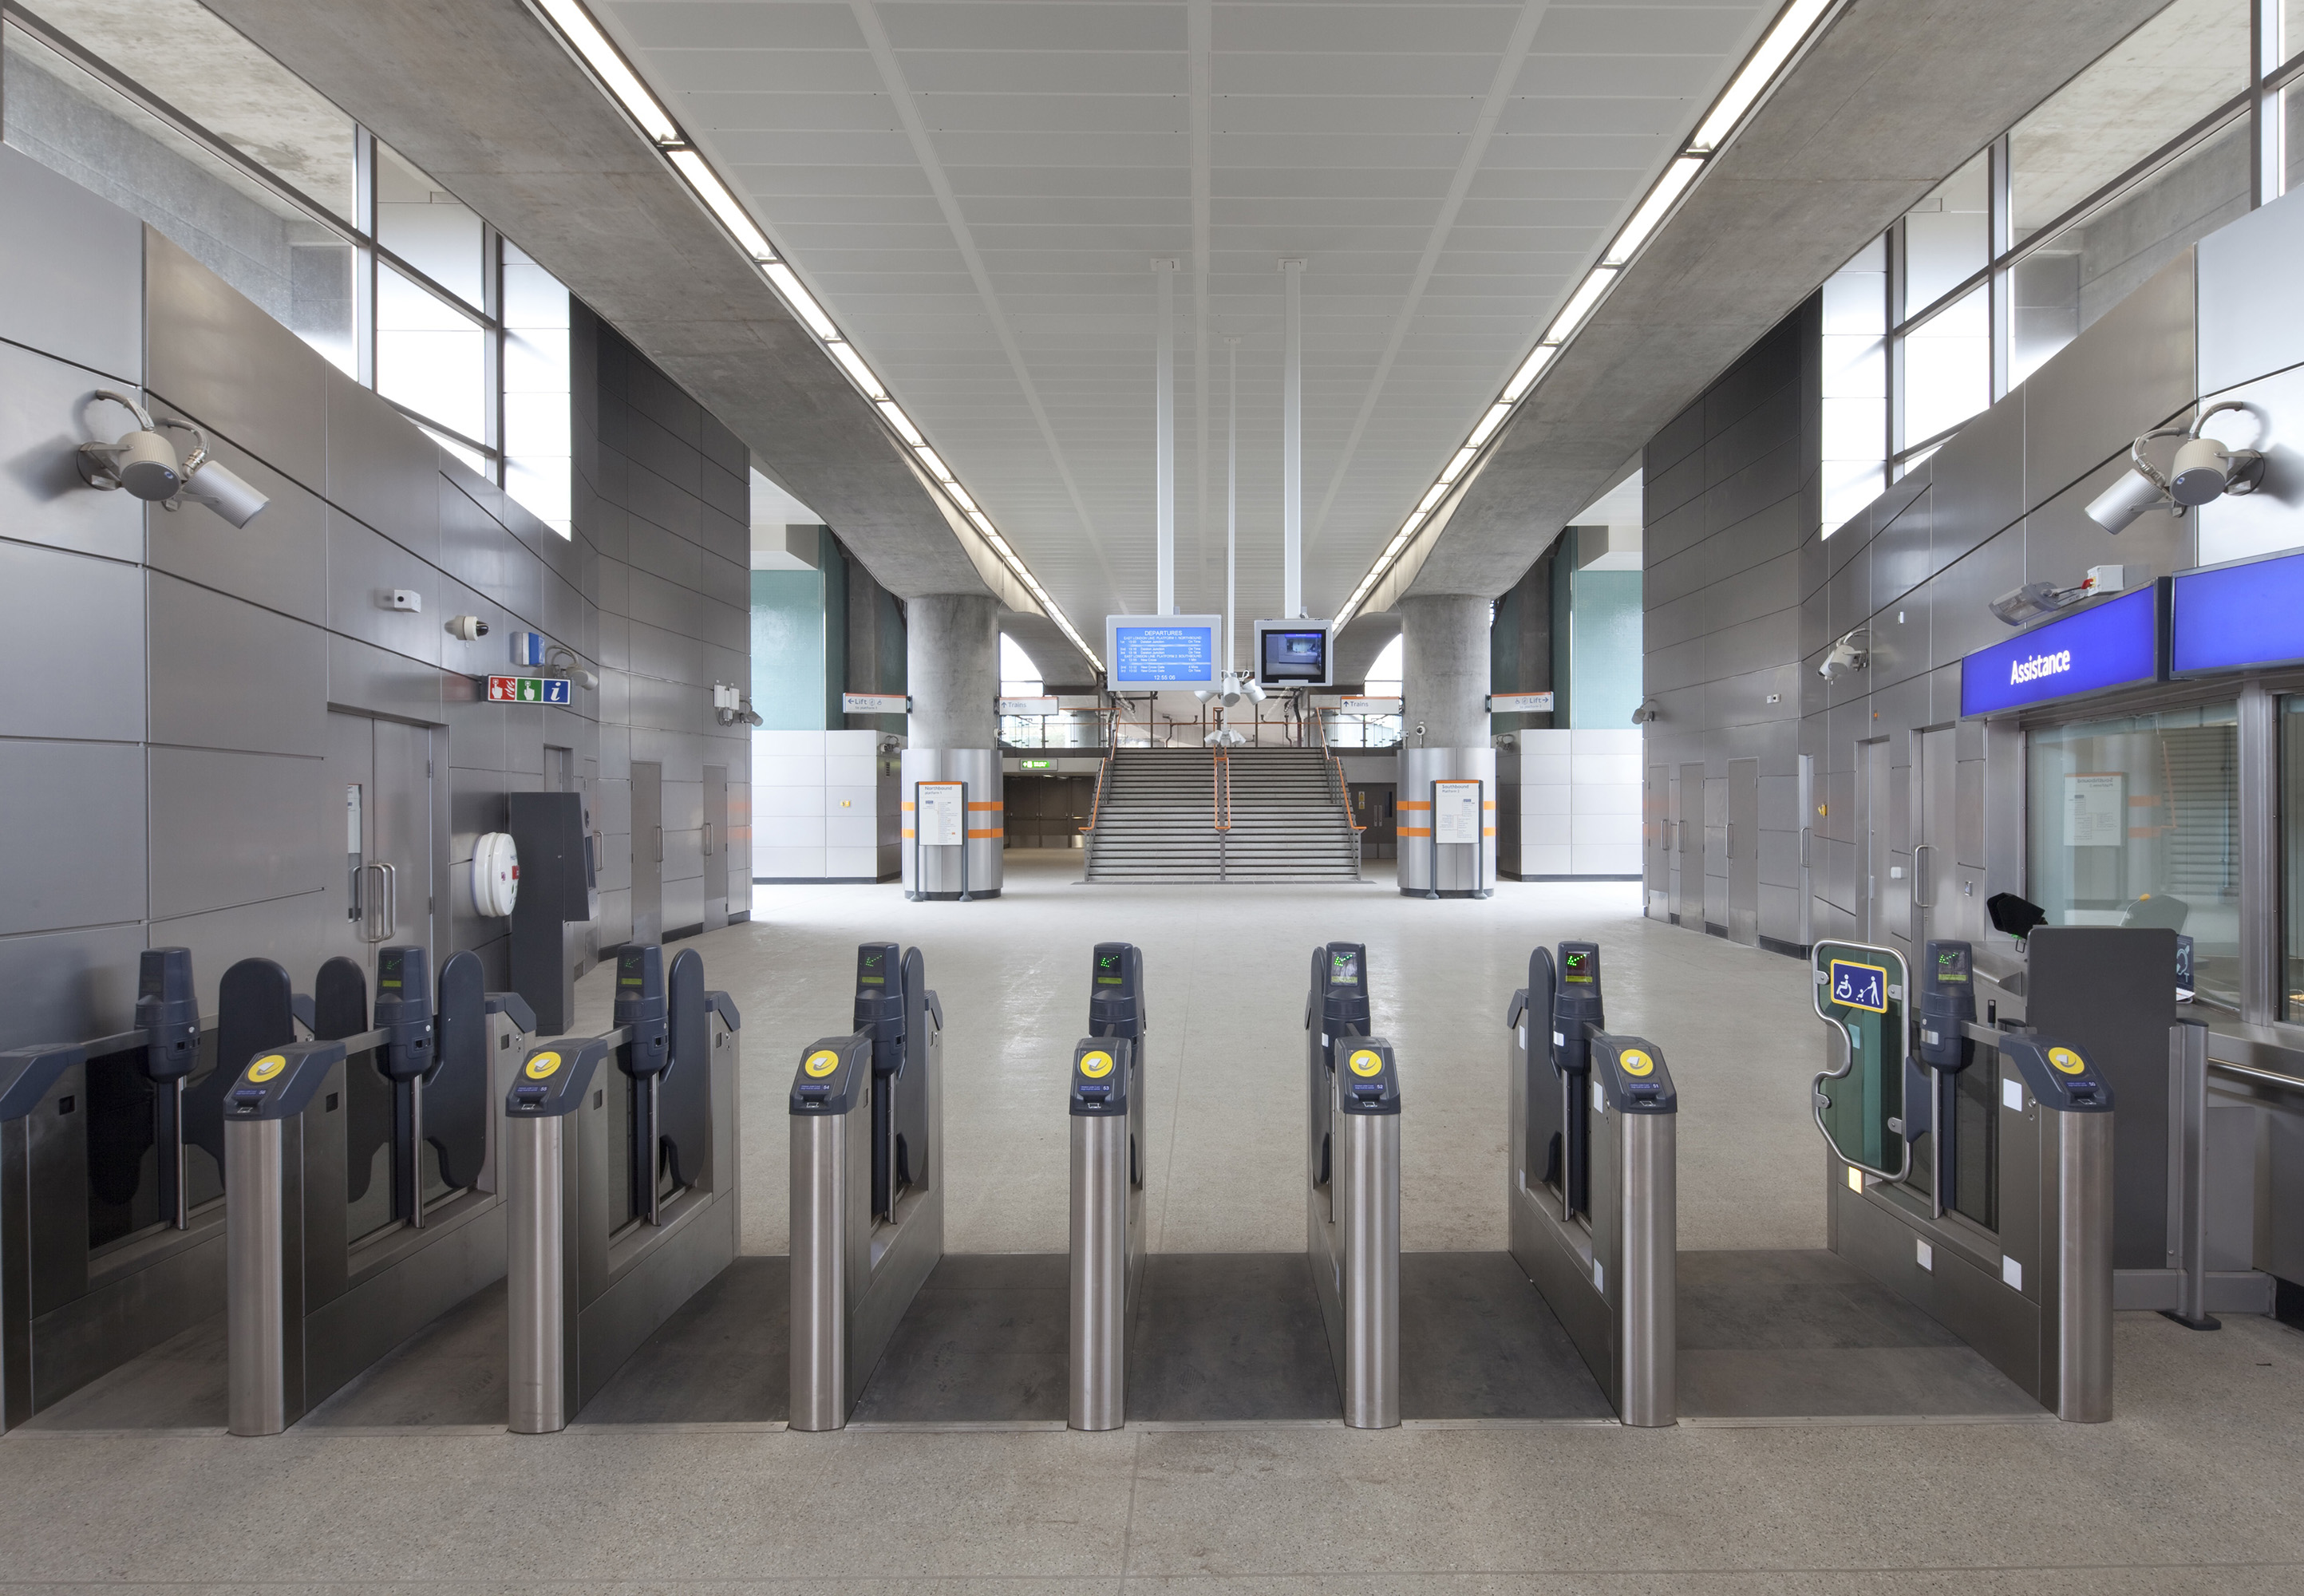 Underground Train Station Ticket Hall Using Armstrong METAL Solutions with TrioGuard™ Coating from Knauf Ceiling Solutions